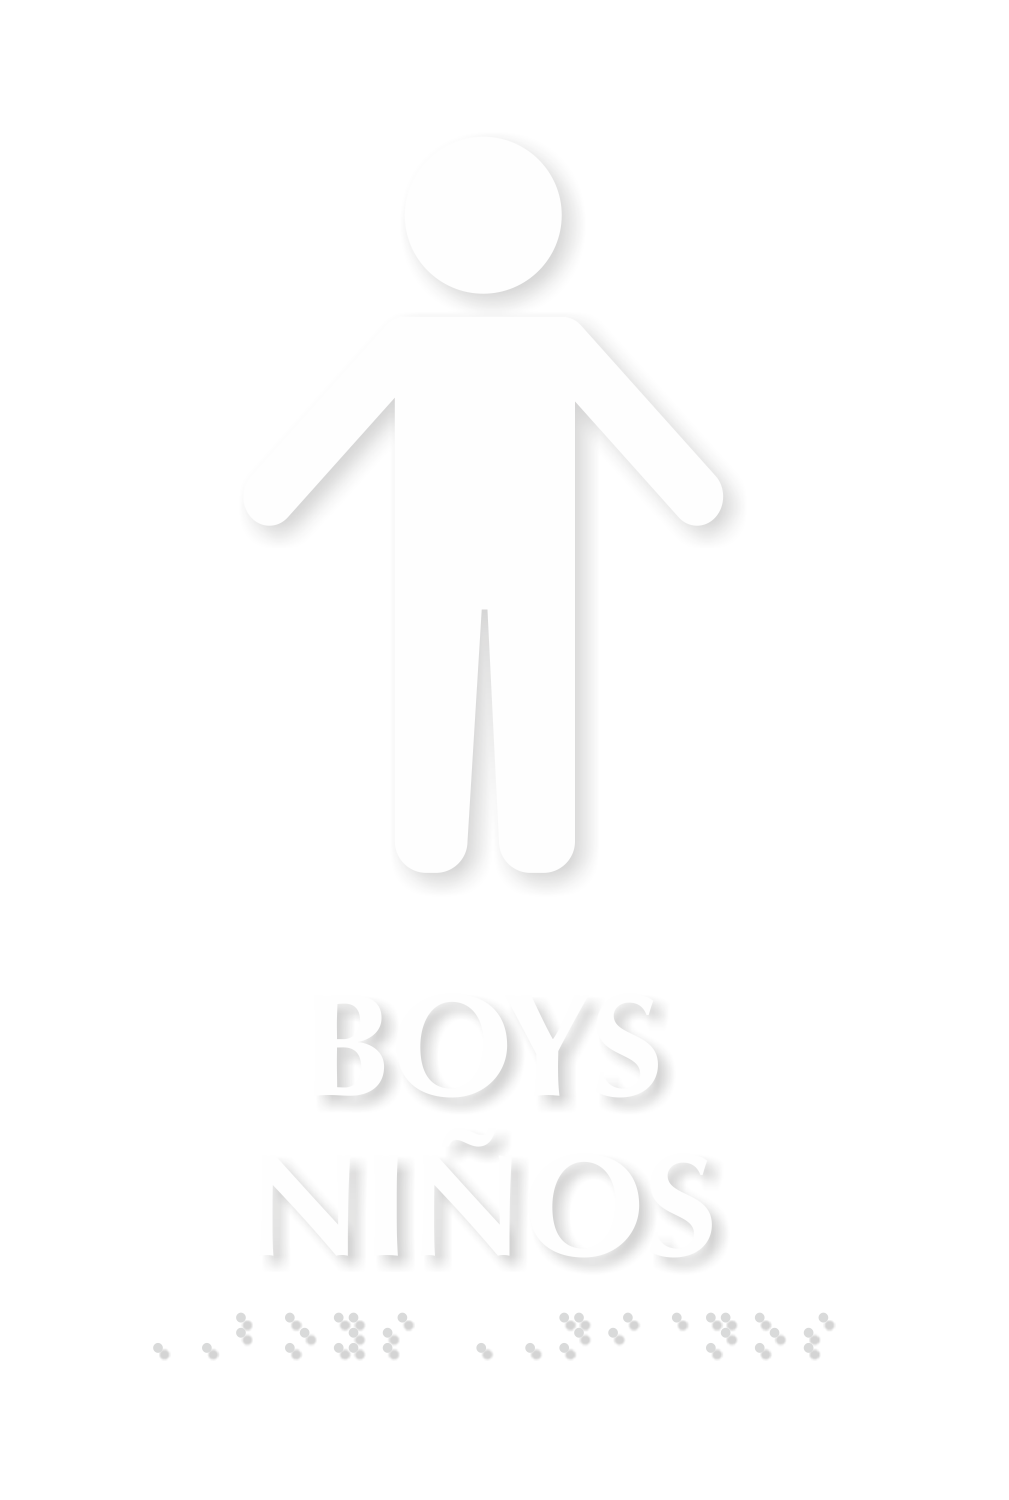 Boys Ninos Bilingual TactileTouch Braille Restroom Sign